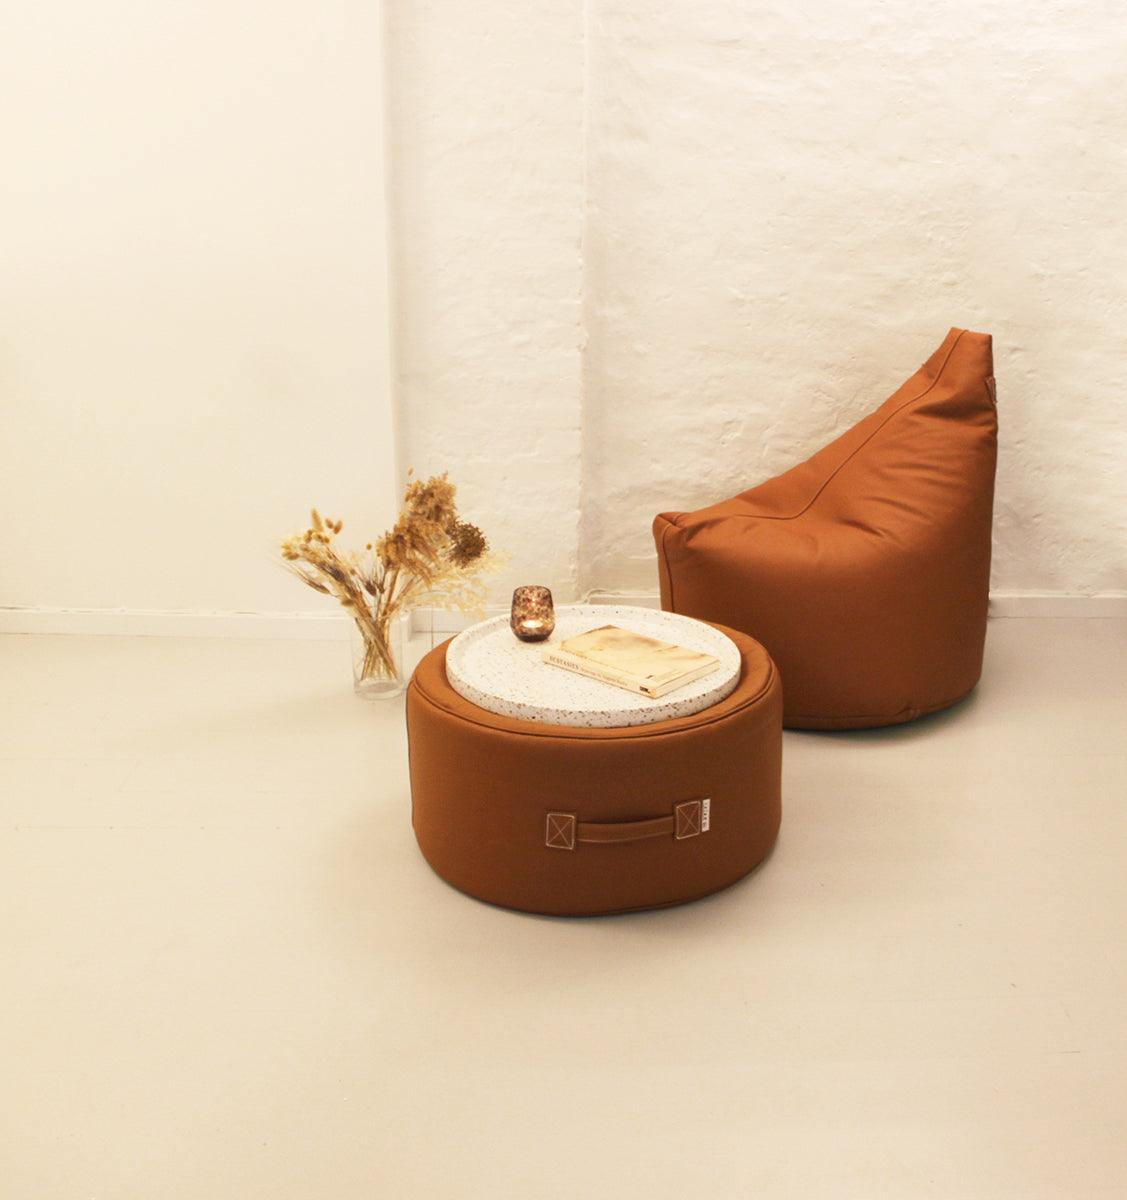 Satellite Leather Lounge Chair - WOO .Design